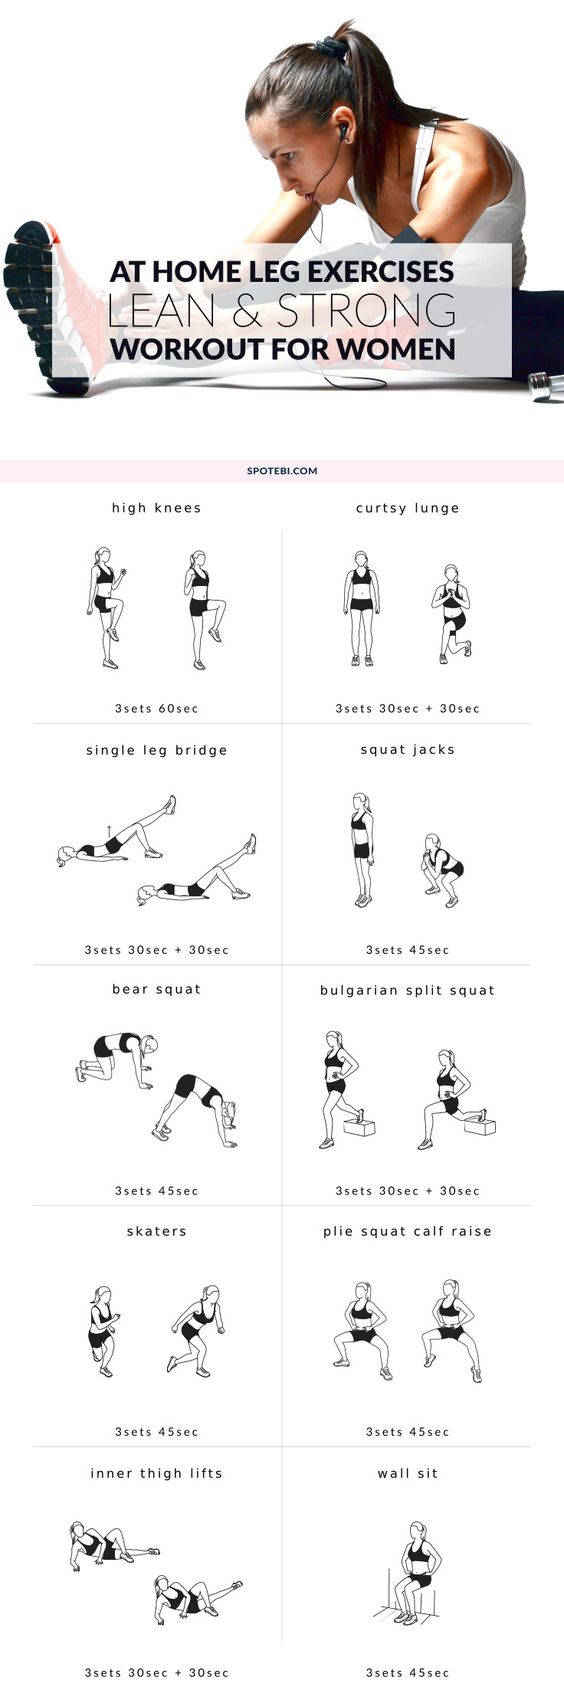 34 Amazing Weight Loss Workouts For Women That Can Be Done At Home